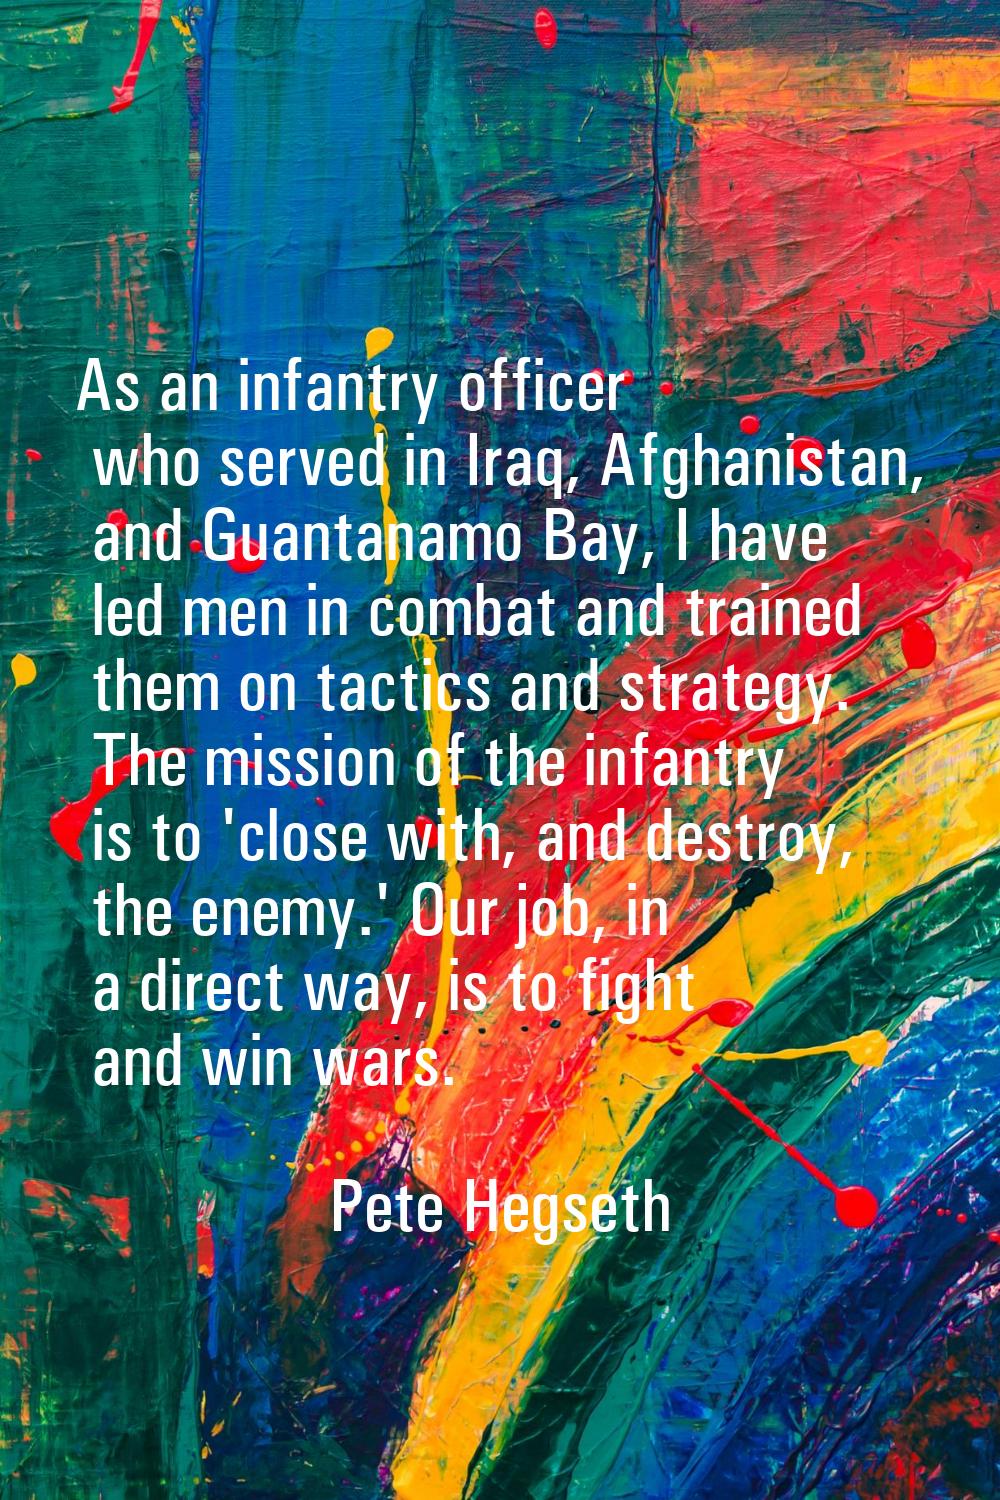 As an infantry officer who served in Iraq, Afghanistan, and Guantanamo Bay, I have led men in comba